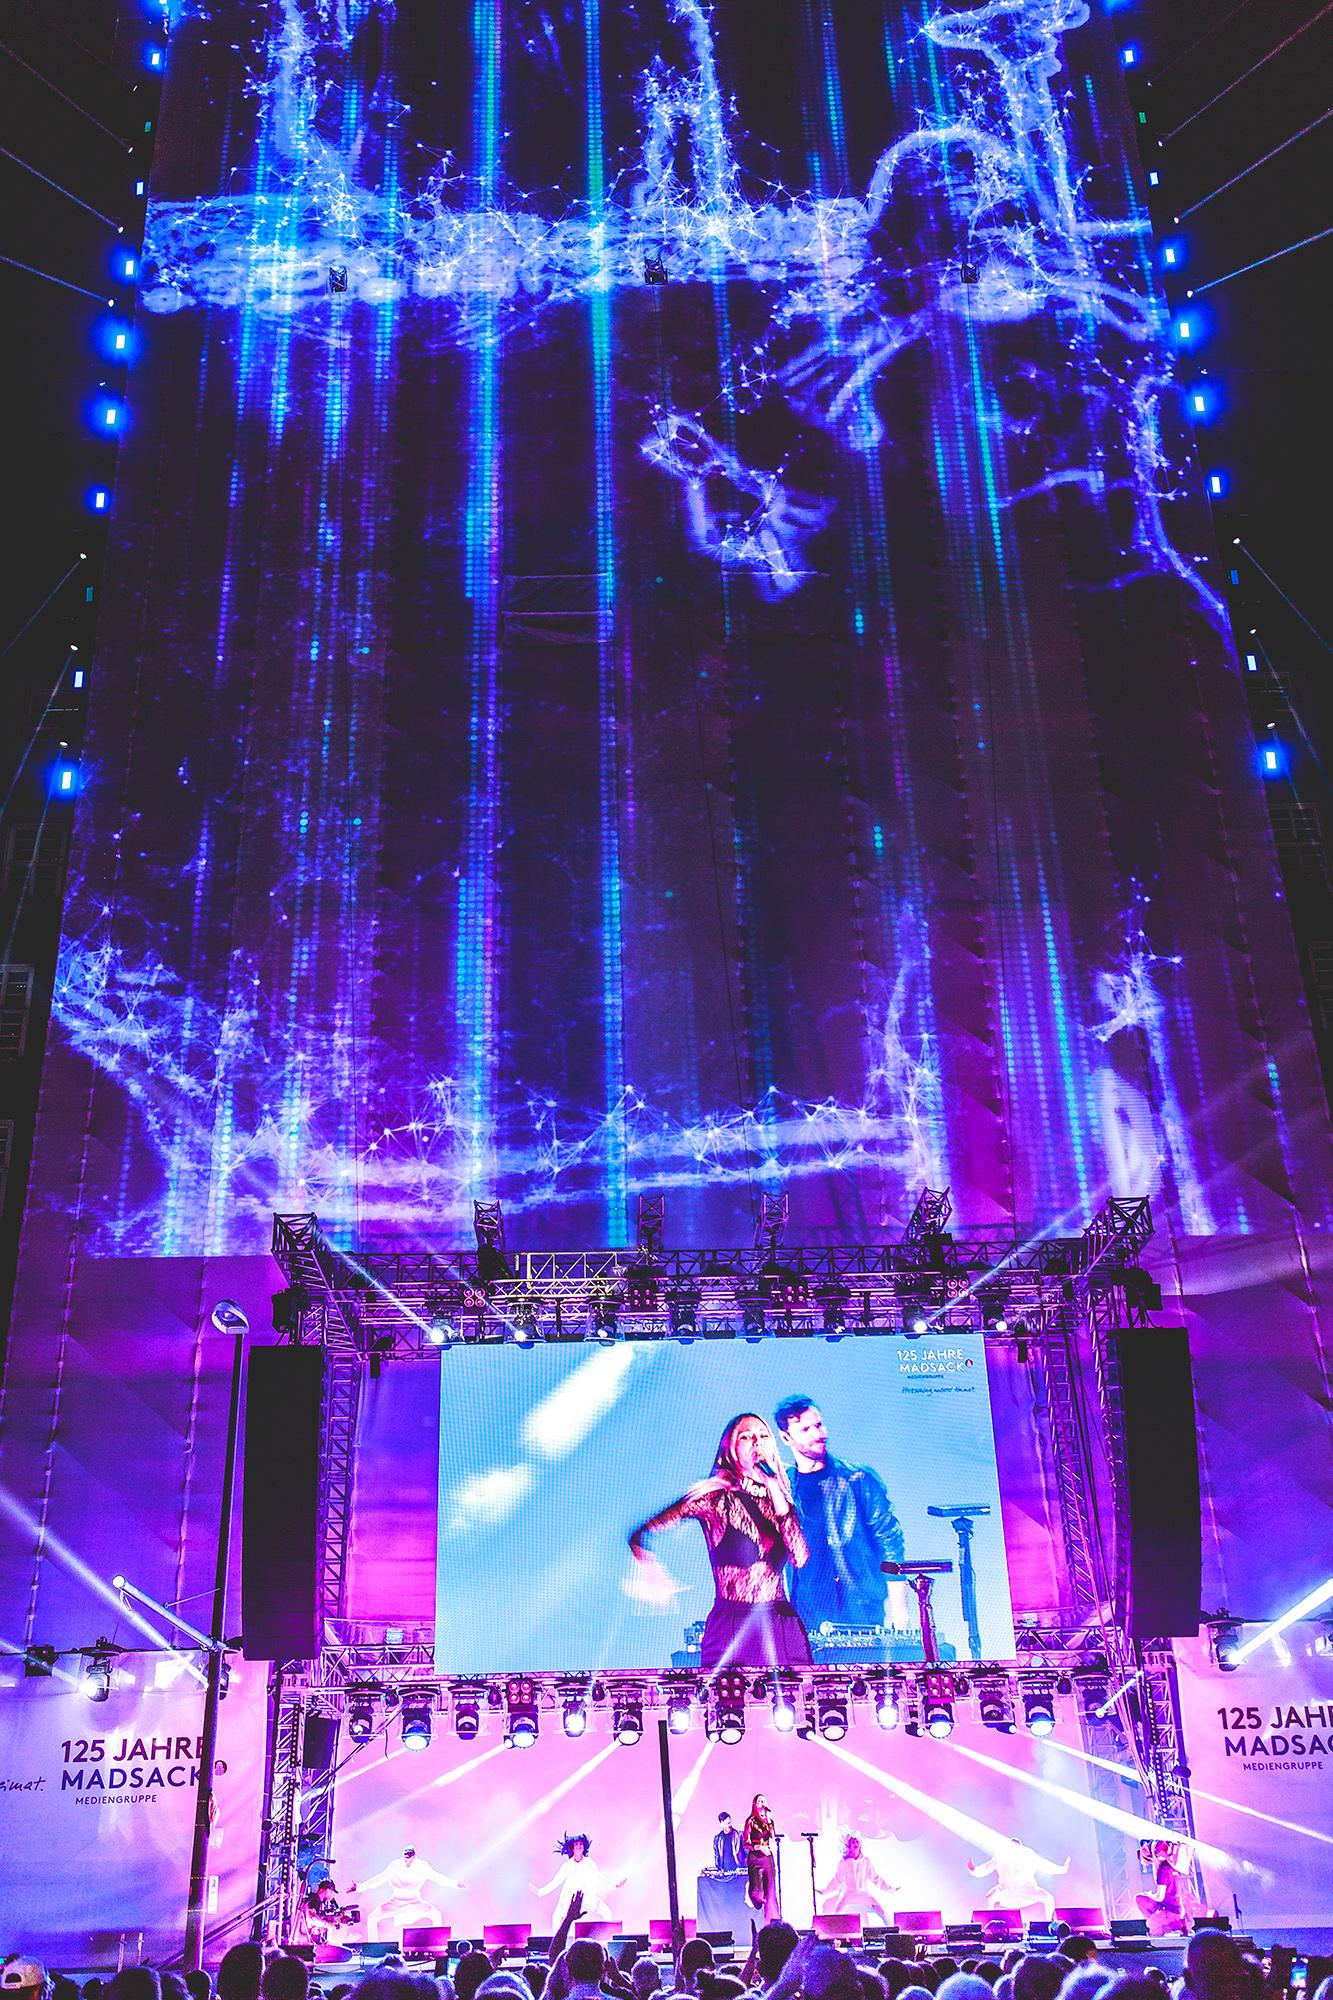 Video mapping of bright, blue sprite-like shapes on a large vertical stage. A large crowd watches a musician outdoors.